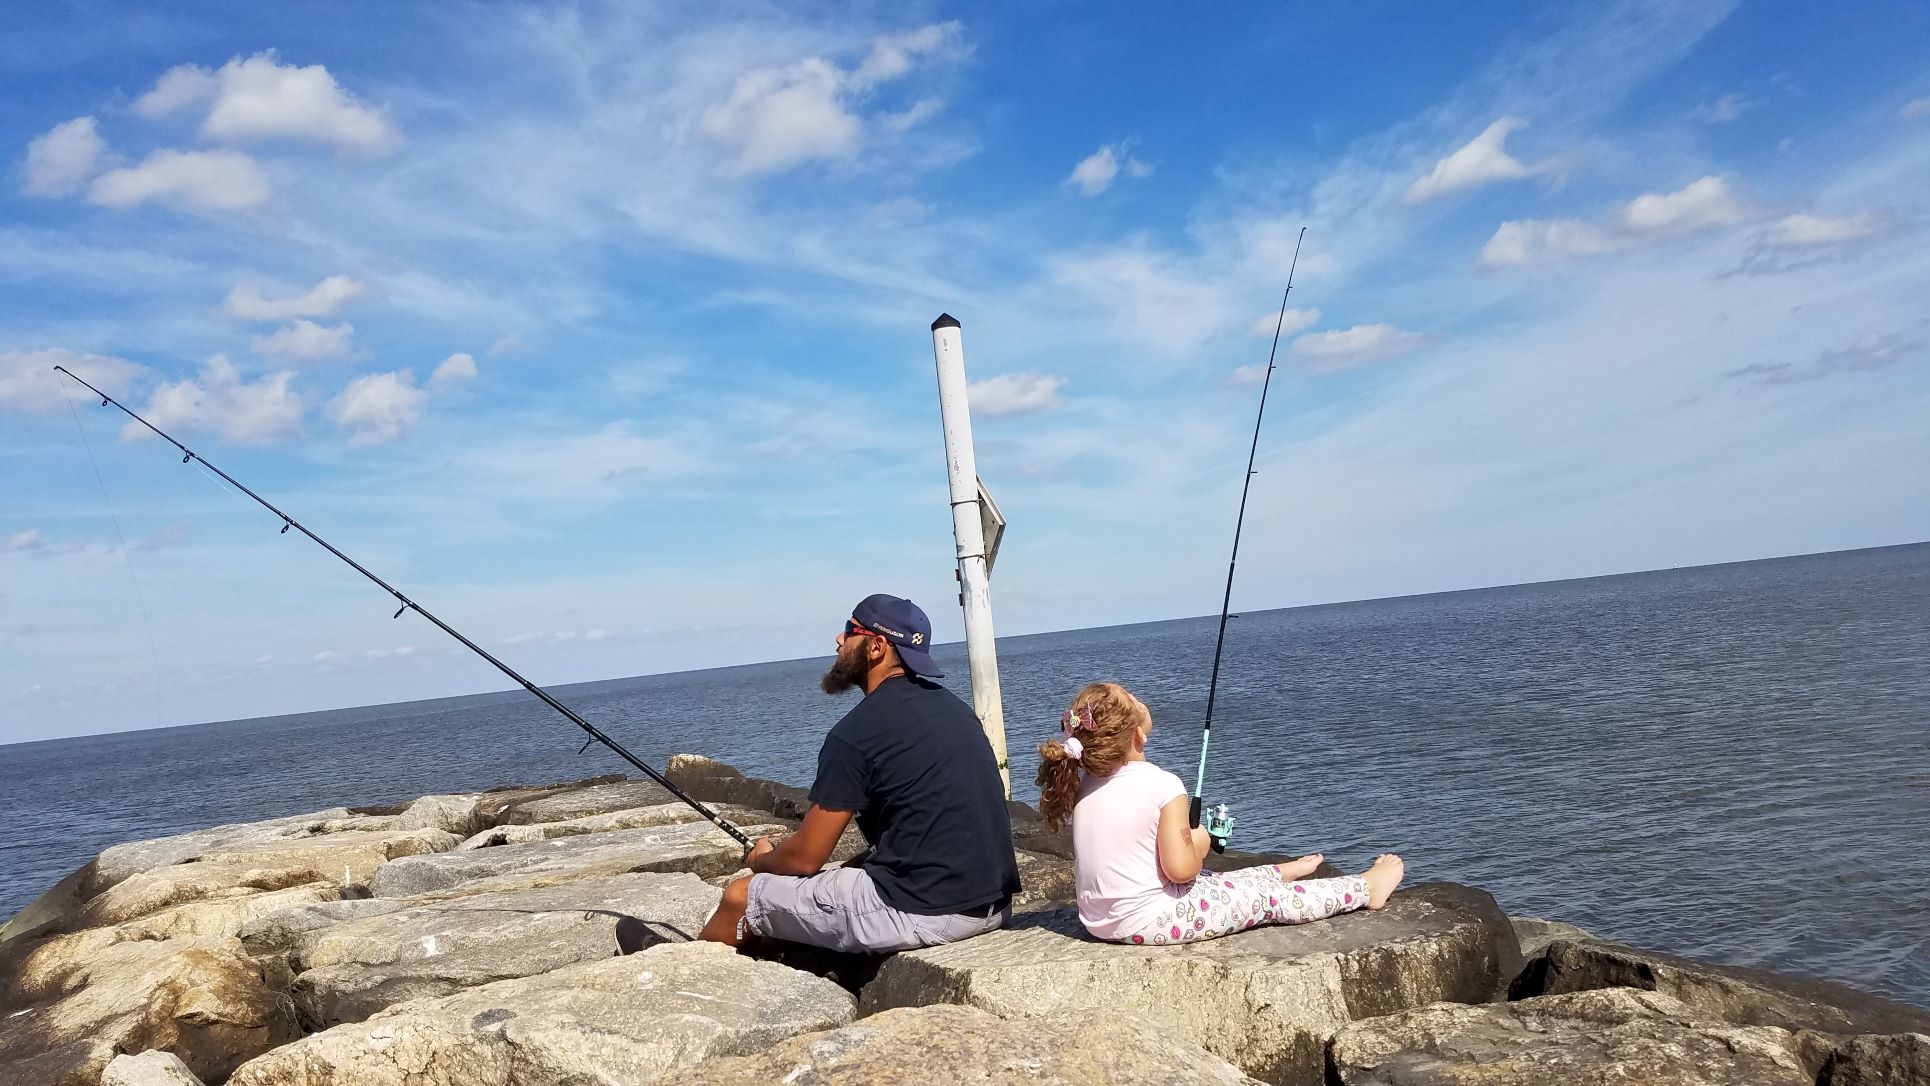 A man and a child sit back-to-back on a stone jetty holding their fishing rods.